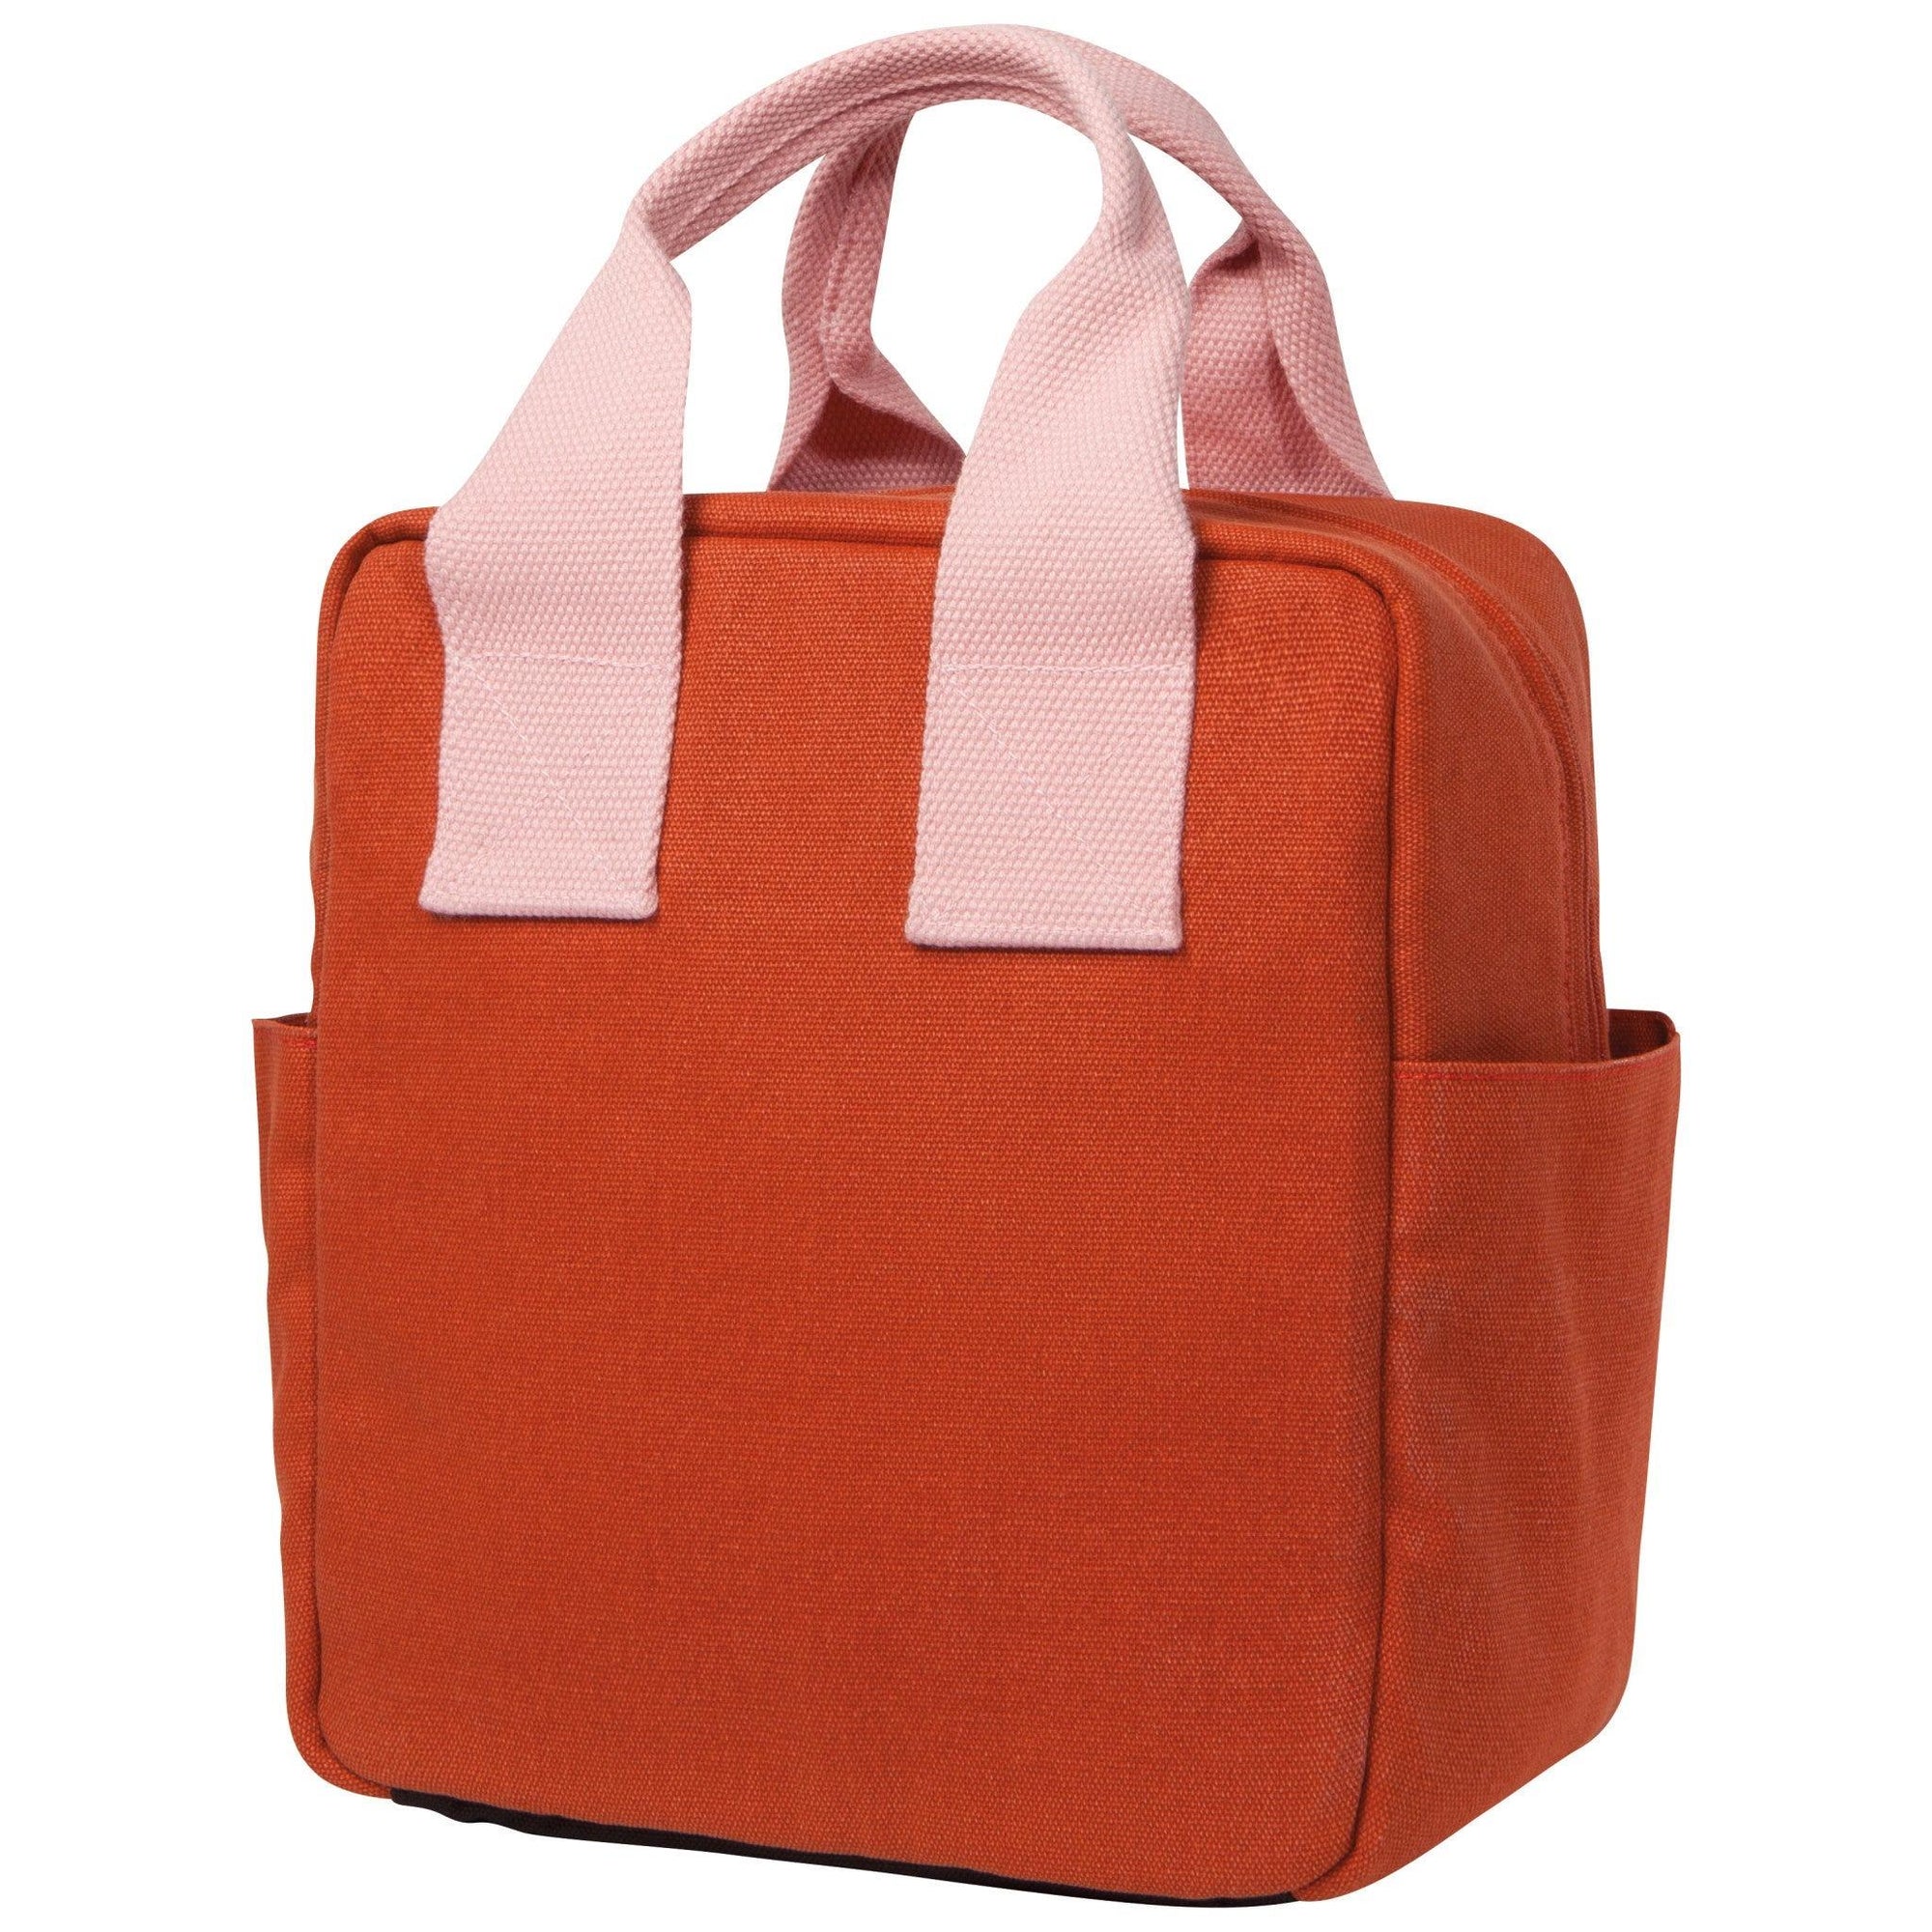 Danica Weekday Lunch Tote